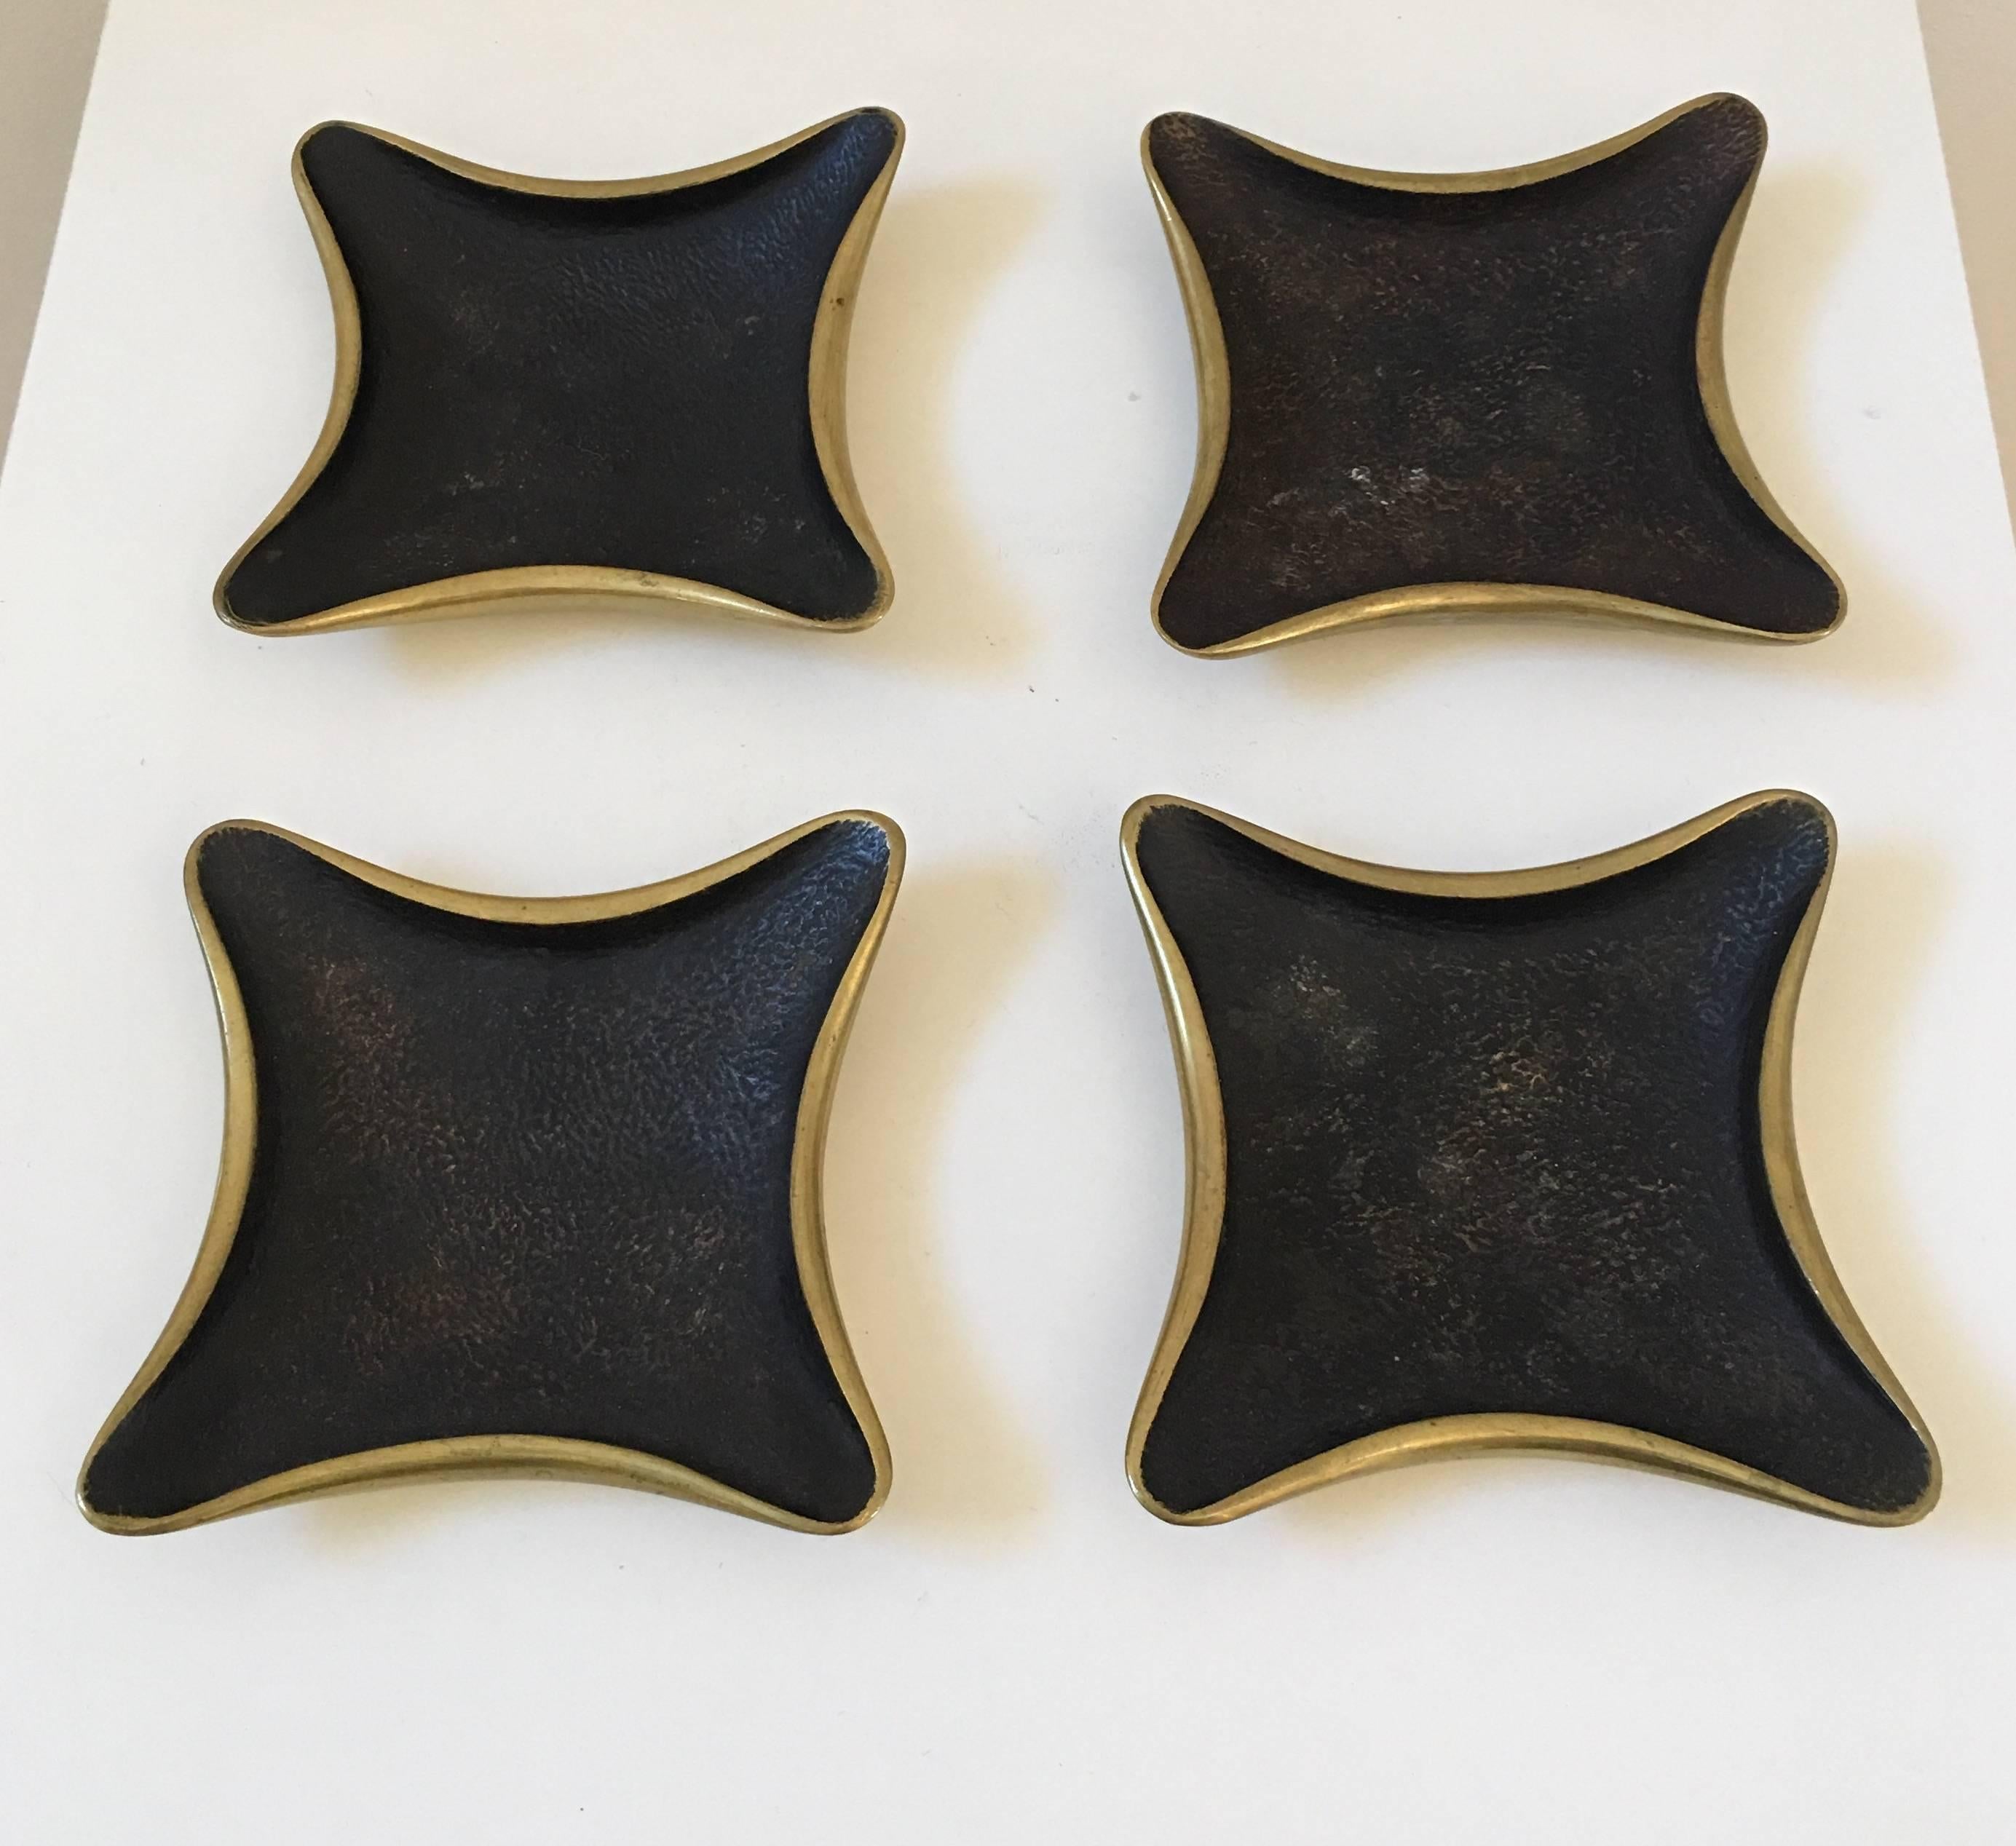 A fabulous and sculptural set of four Wiener Werkstatte trays by Karl Hagenauer. These stylized brass trays are substantially heavy and very well-made with a hand hewn quality typical of the Arts & Crafts and Art Deco periods. The blackened and